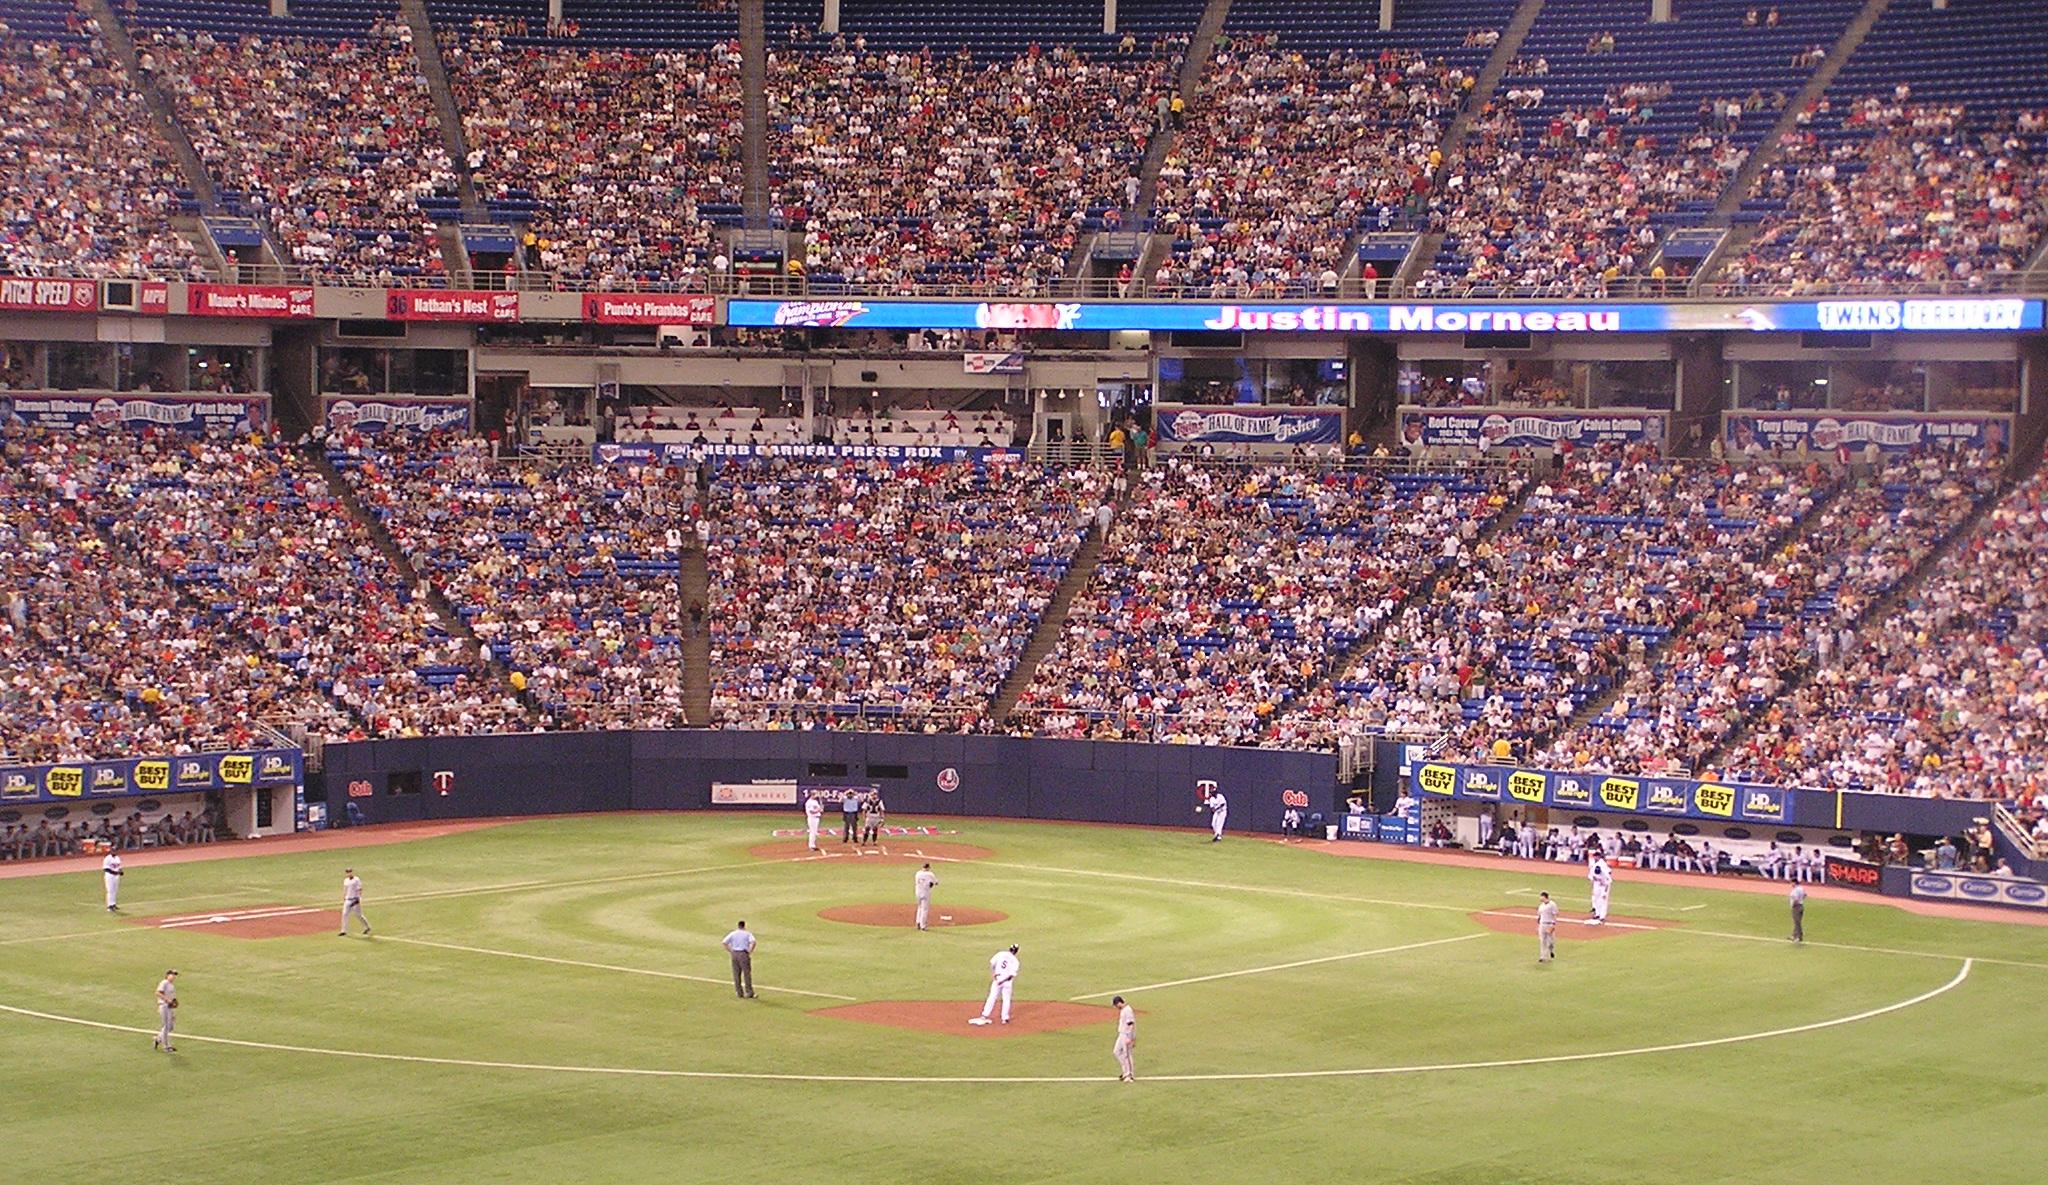 Justin Morneau at the plate - The Metrodome